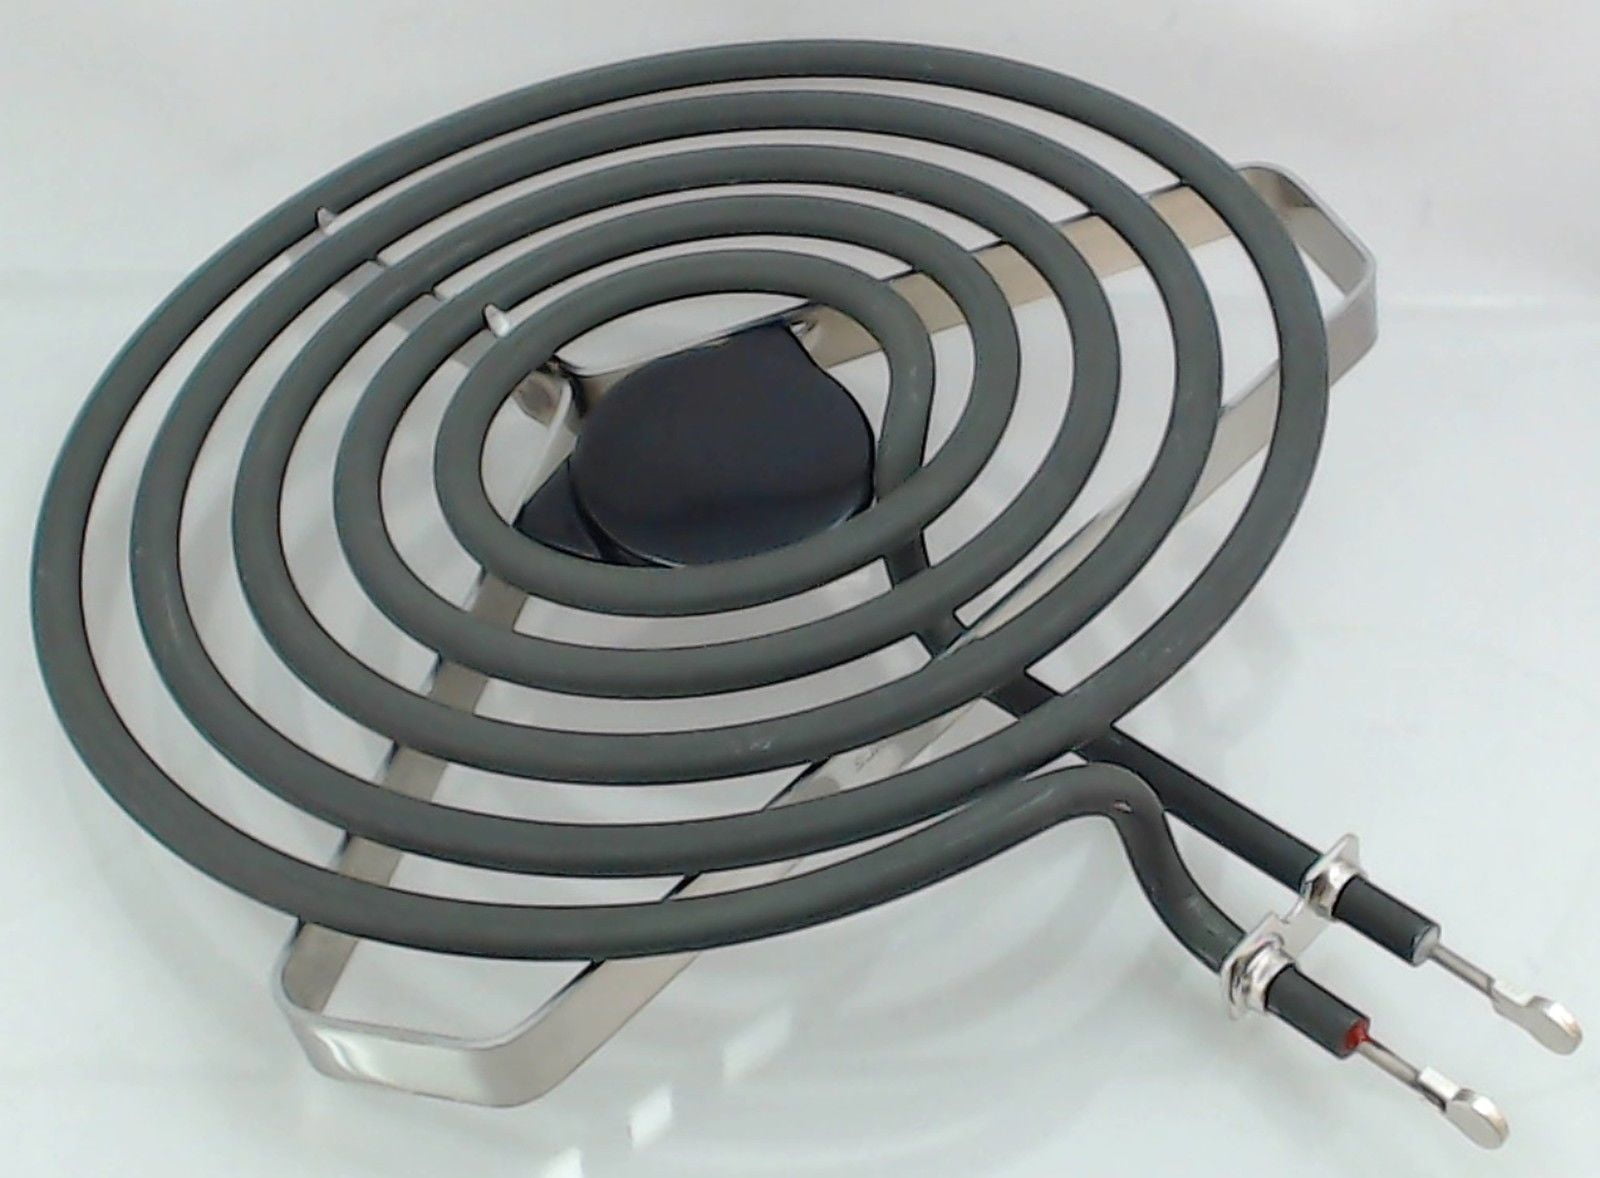 Plug In Burner Element 6" For Frigidaire Whirlpool Kenmore Electric Range Stove 